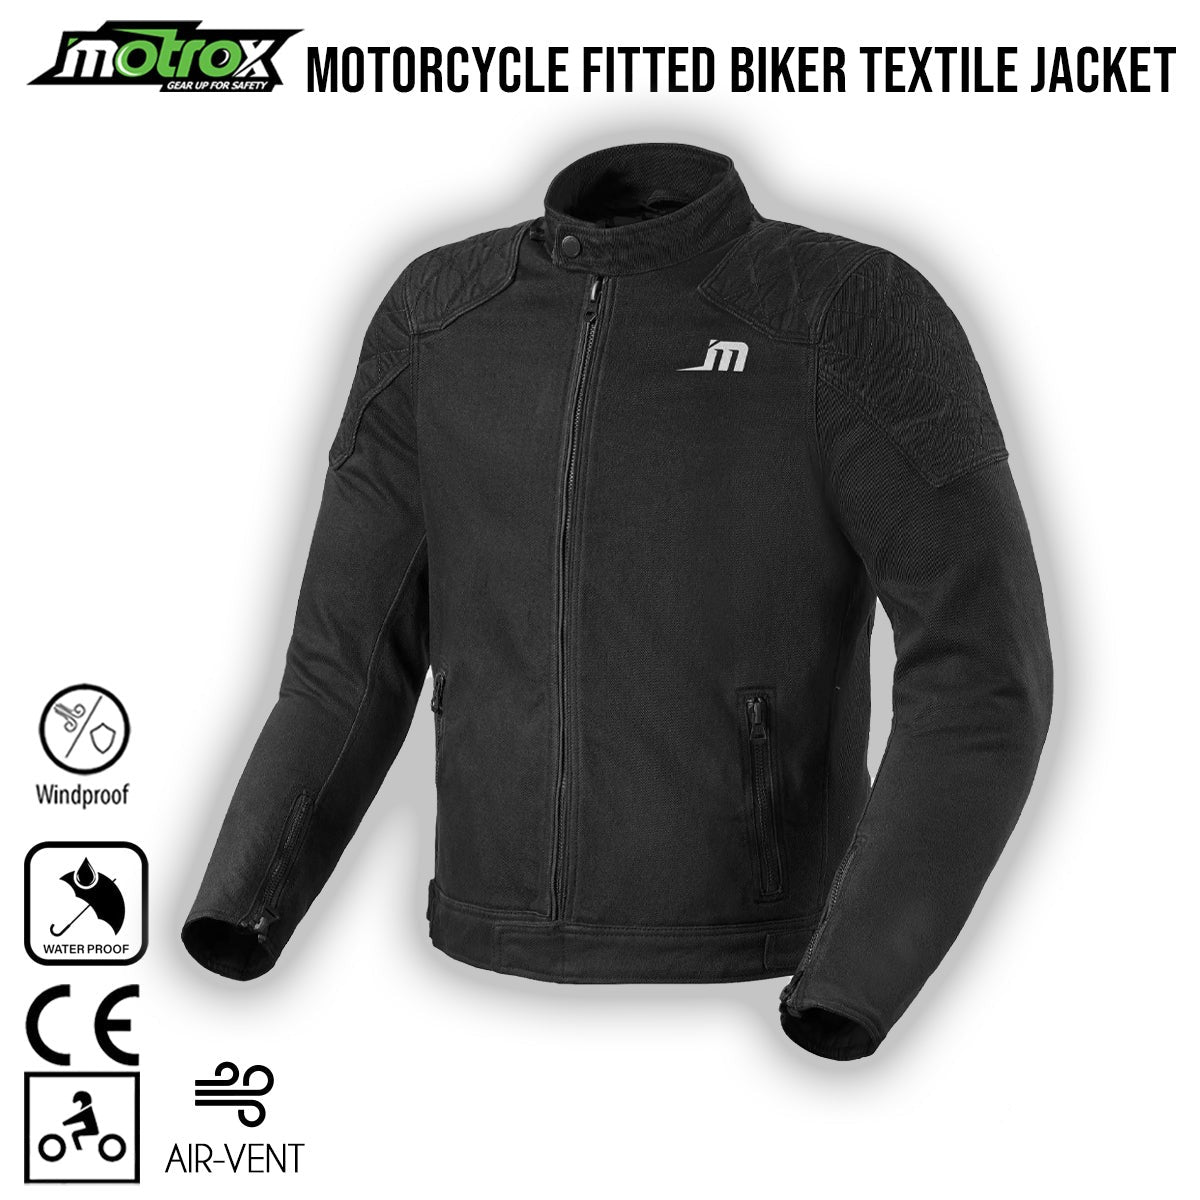 Riding Gear, Riding Jackets, Best Riding Gear in India, Best riding gear  brand, CE Certified riding jacket, Level 2 riding jacket, CE Certified riding  gear